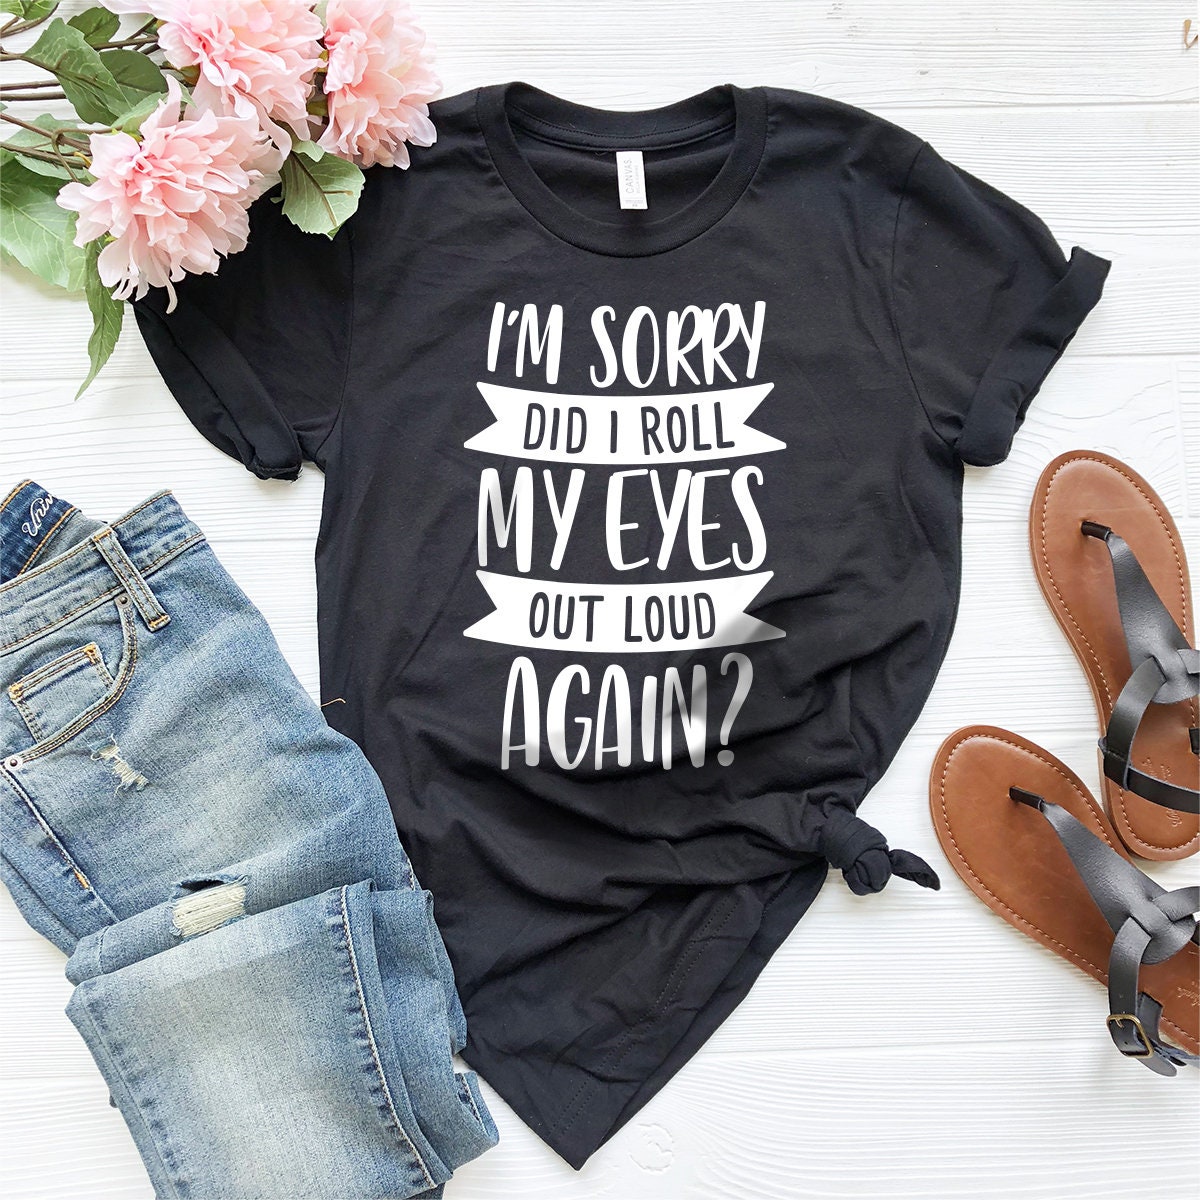 Funny Saying Shirt, I'm Sorry Did I Roll My Eyes Out Loud Again Shirt, Funny Sarcastic Shirt, Funny Shirt, - Fastdeliverytees.com